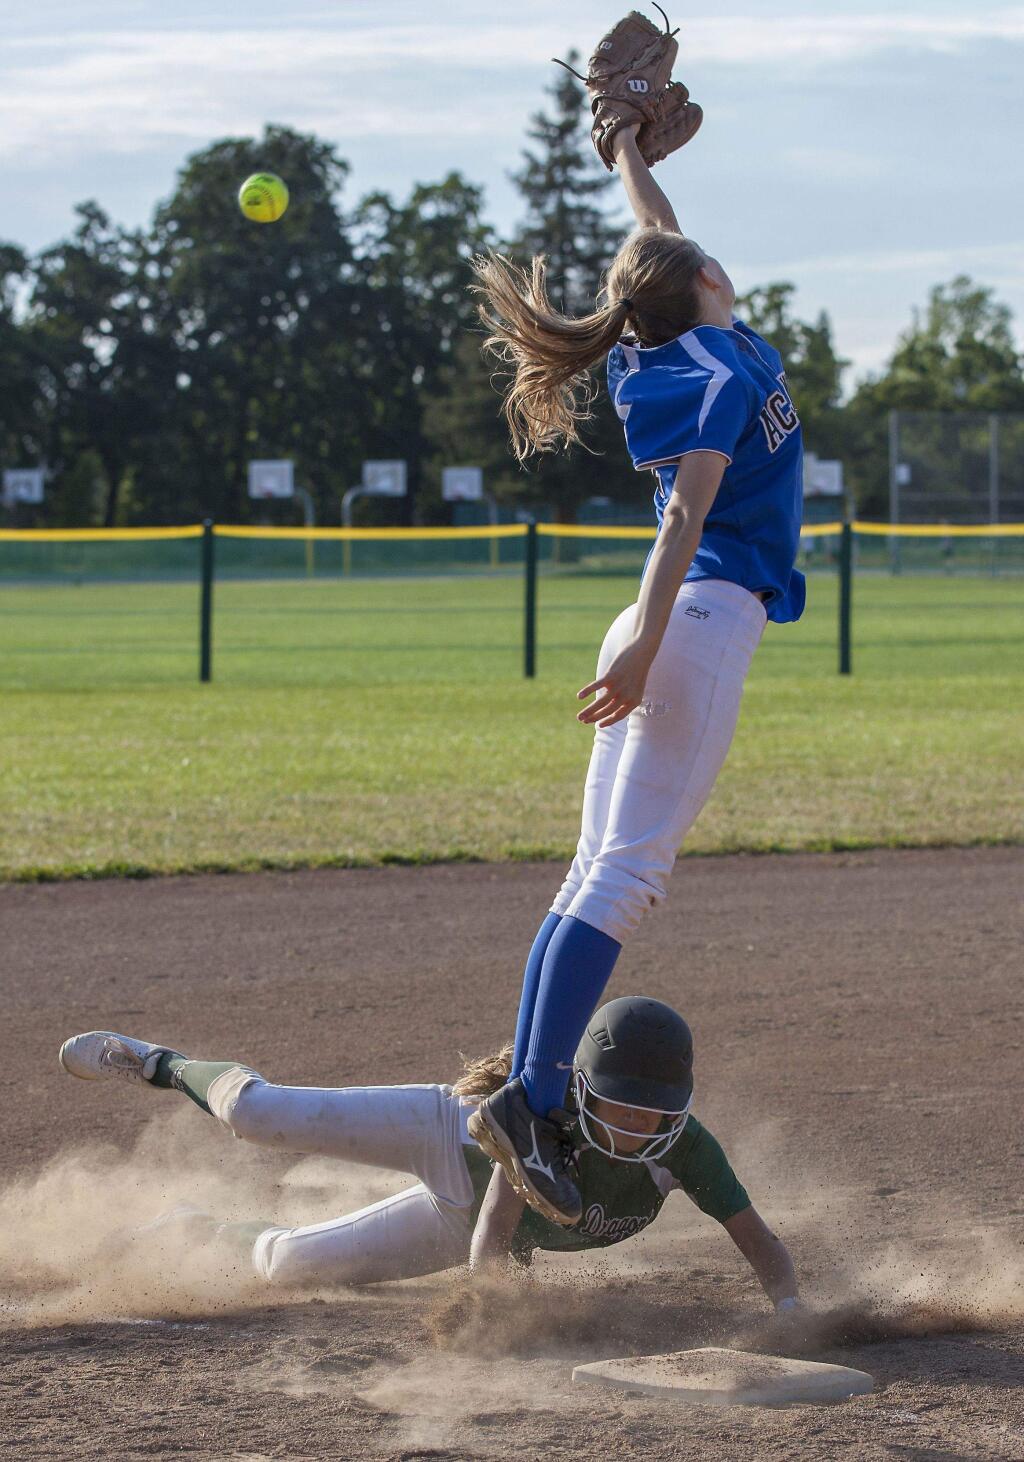 A Sonoma Valley player slides into third beneath a wild throw during Tuesday, May 24 action at Arnold Field. The Lady Dragons softball team lost the playoff game against Acalanes by a score of 13-8. (Photos by Robbi Pengelly/Index-Tribune)